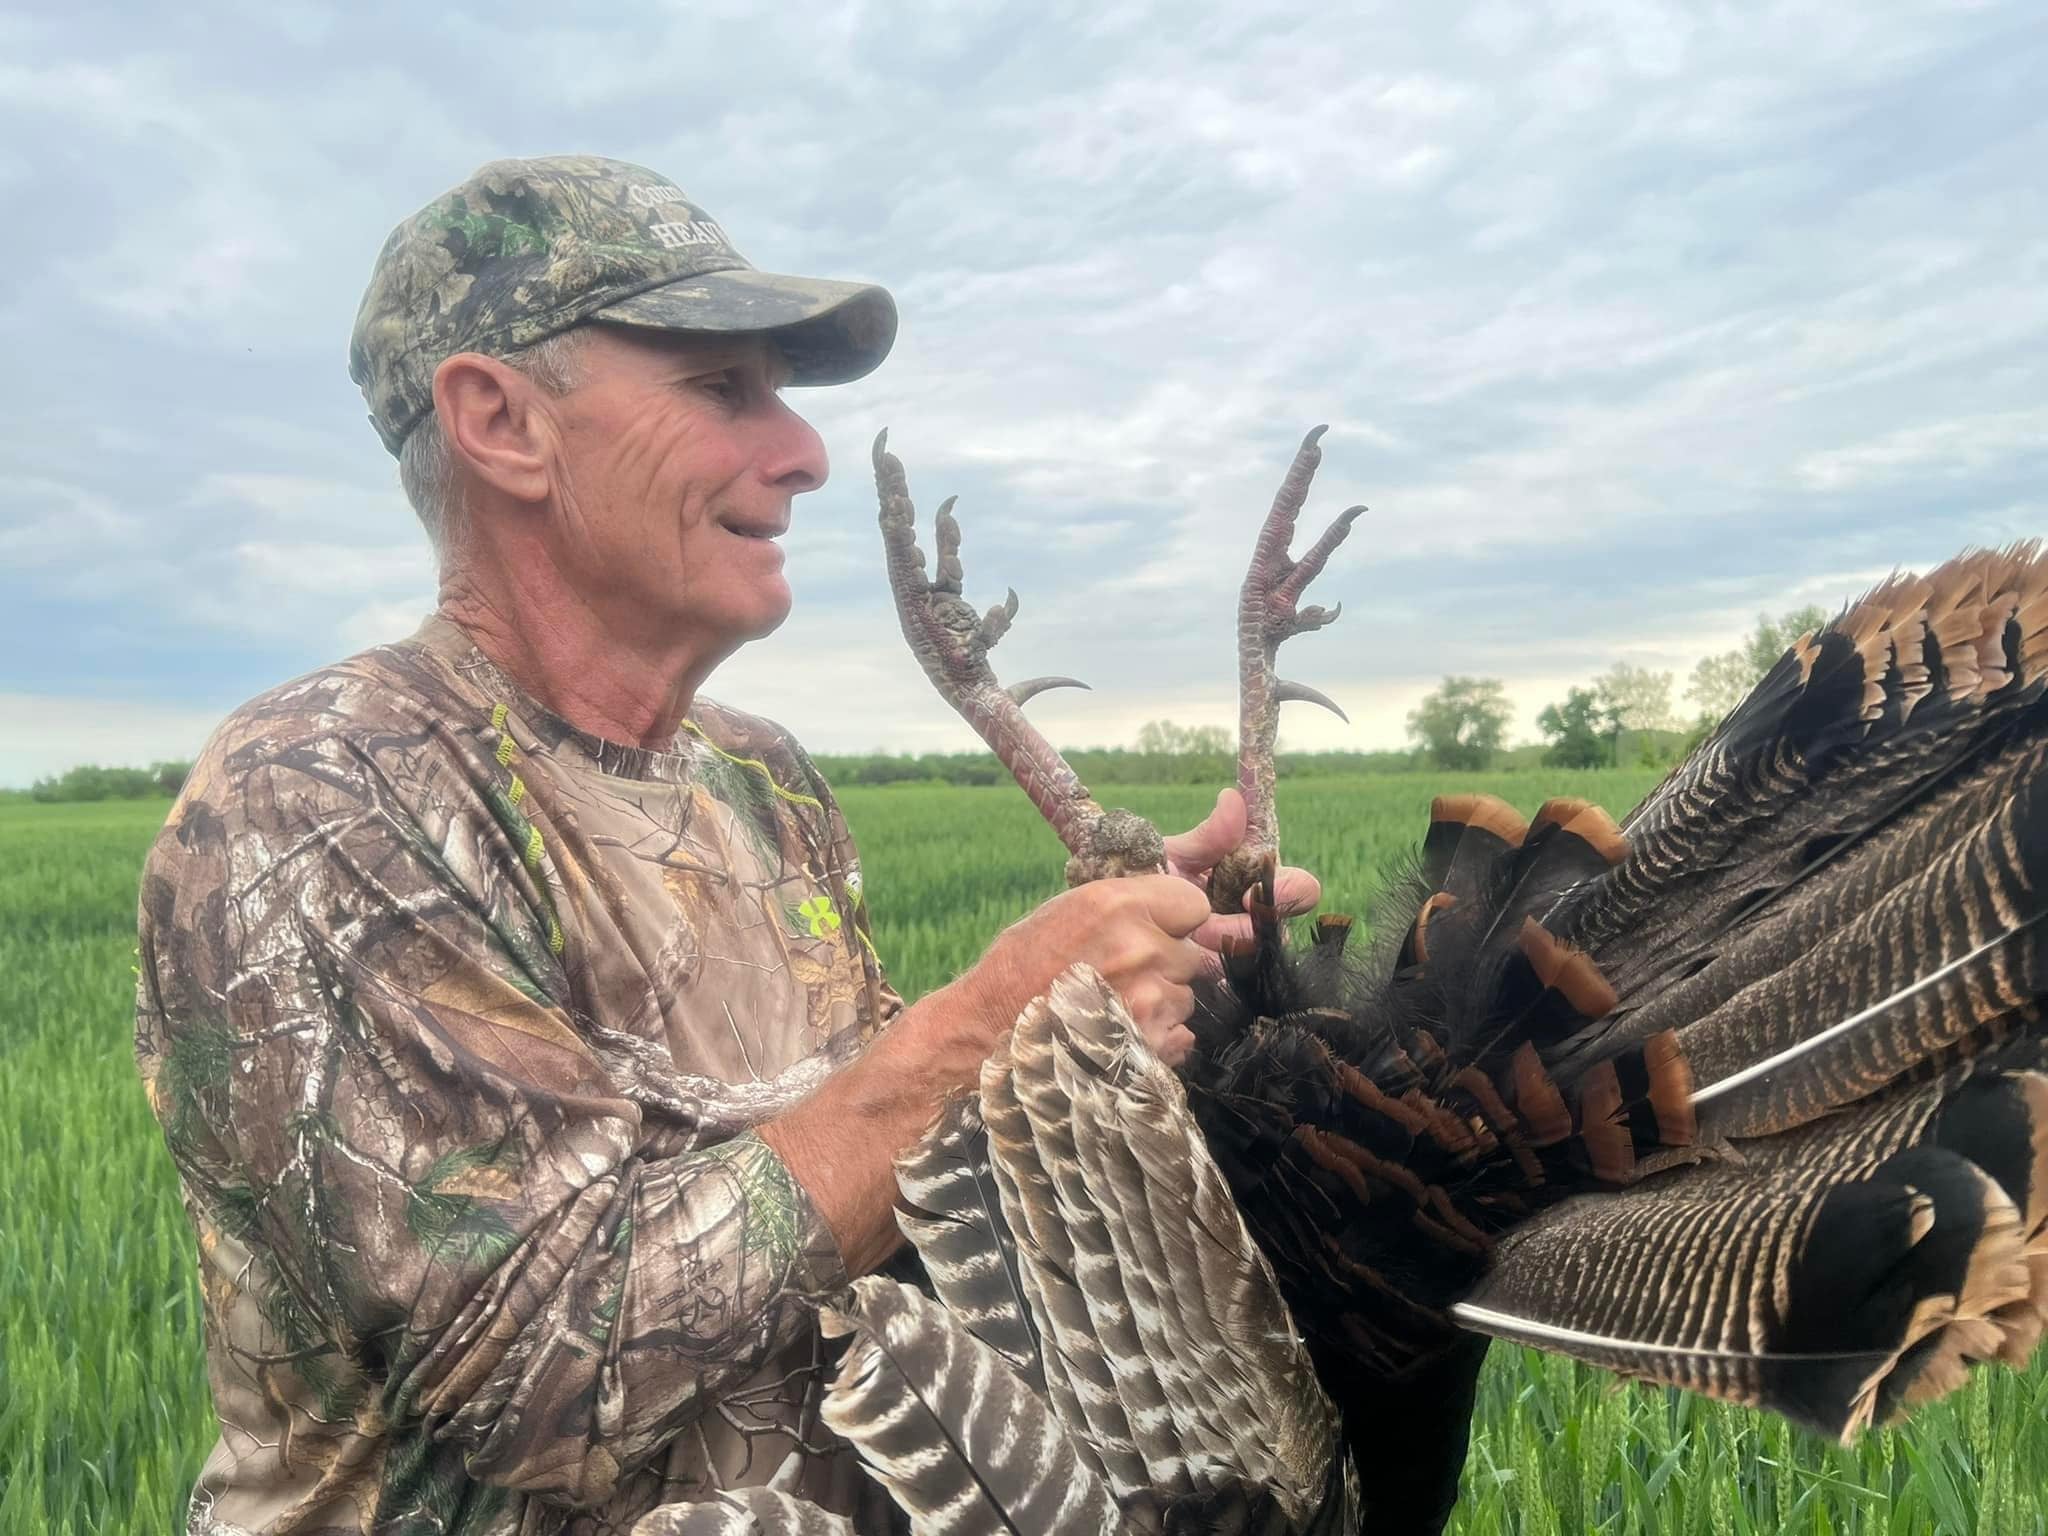 Gobbler Taken by Maryland Hunter Is State’s Pending #2 All-Time